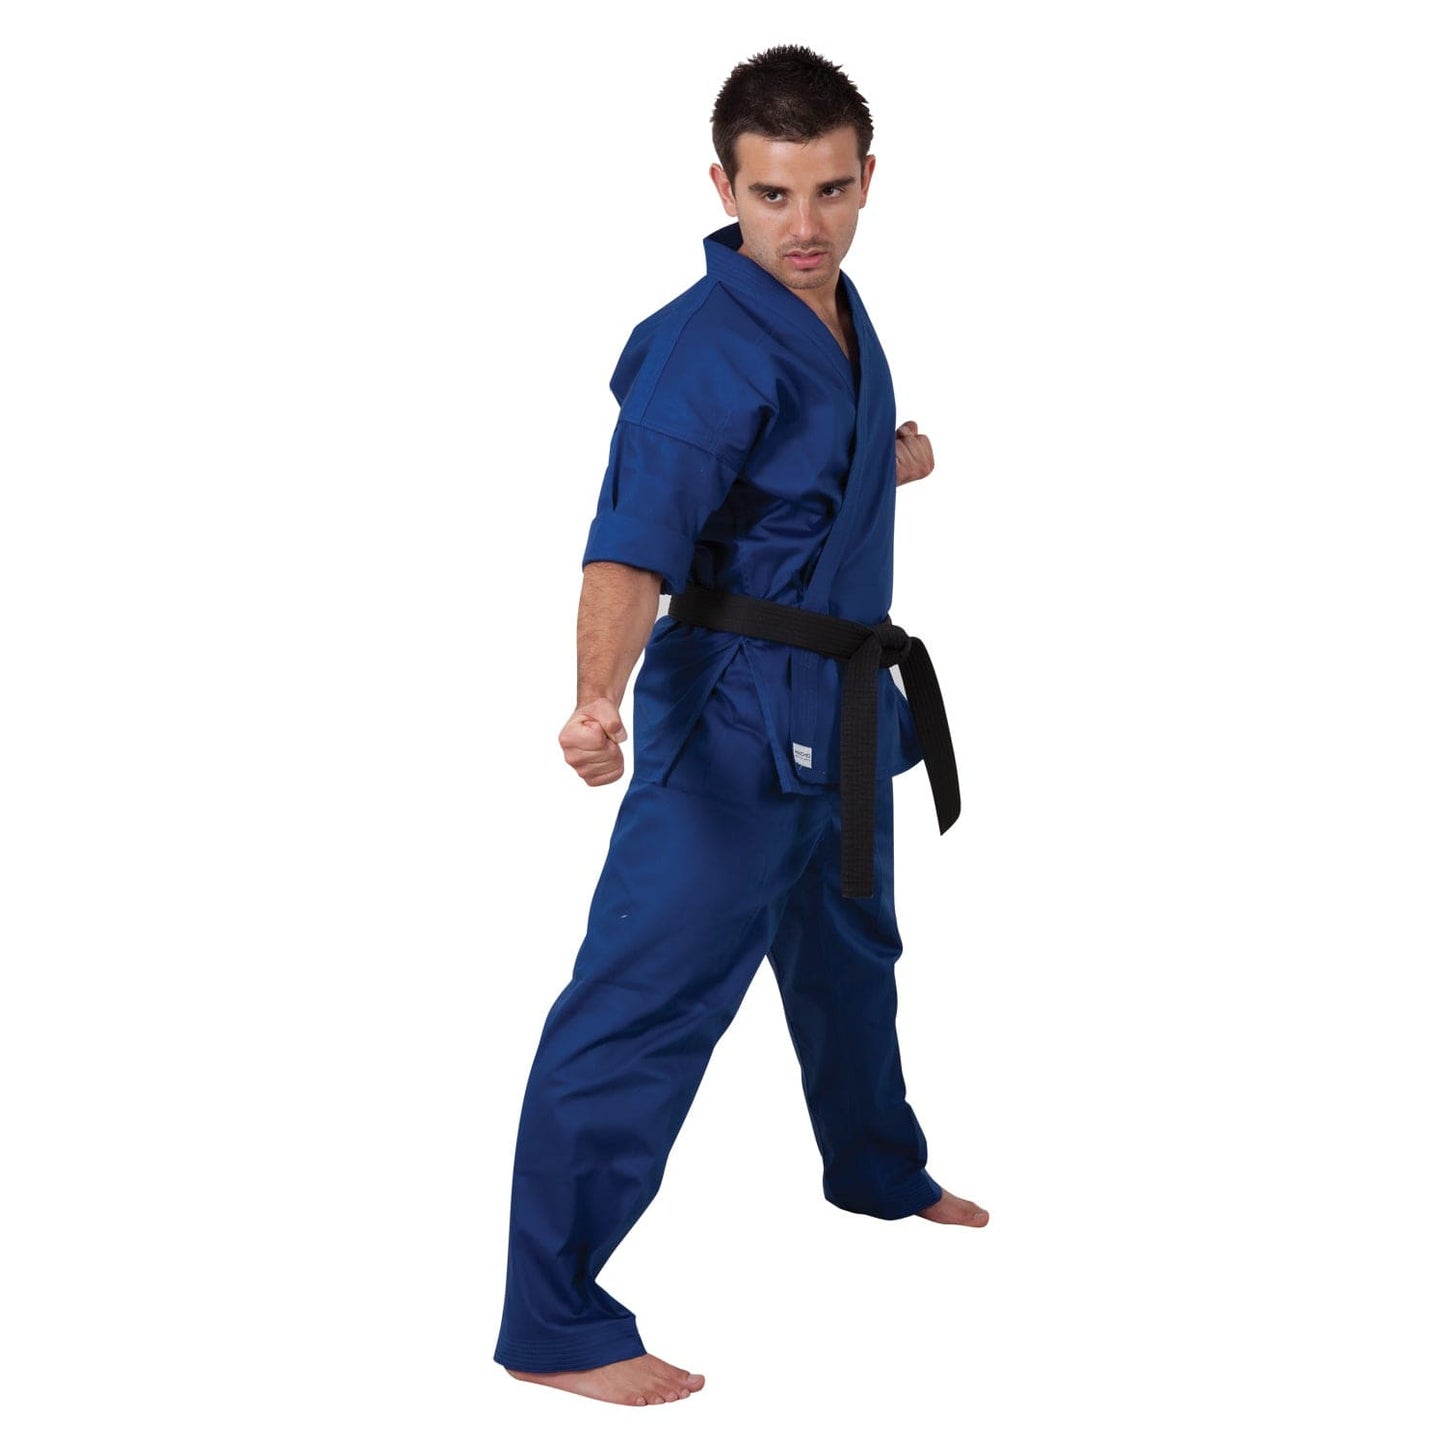 Macho sporting goods MACHO TRADITIONAL MIDDLEWEIGHT Karate